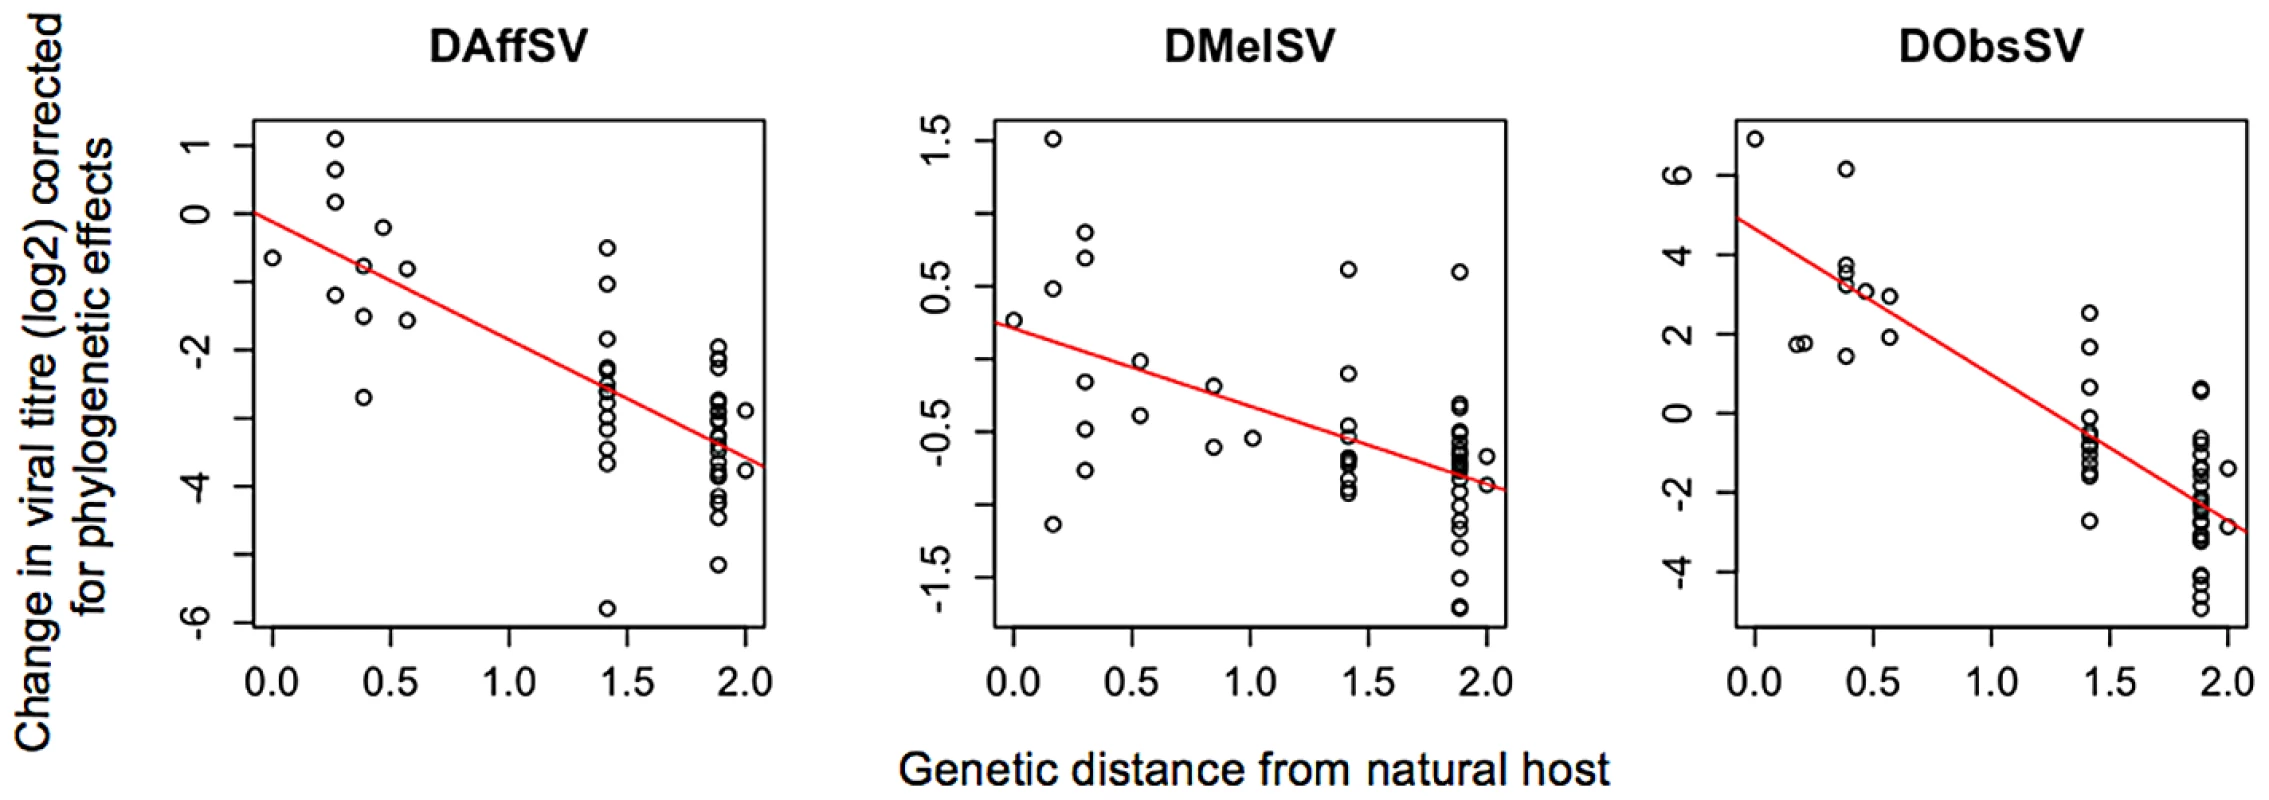 The effect of the genetic distance of a novel host from the natural host on the titre of three sigma viruses 15 days after injection.